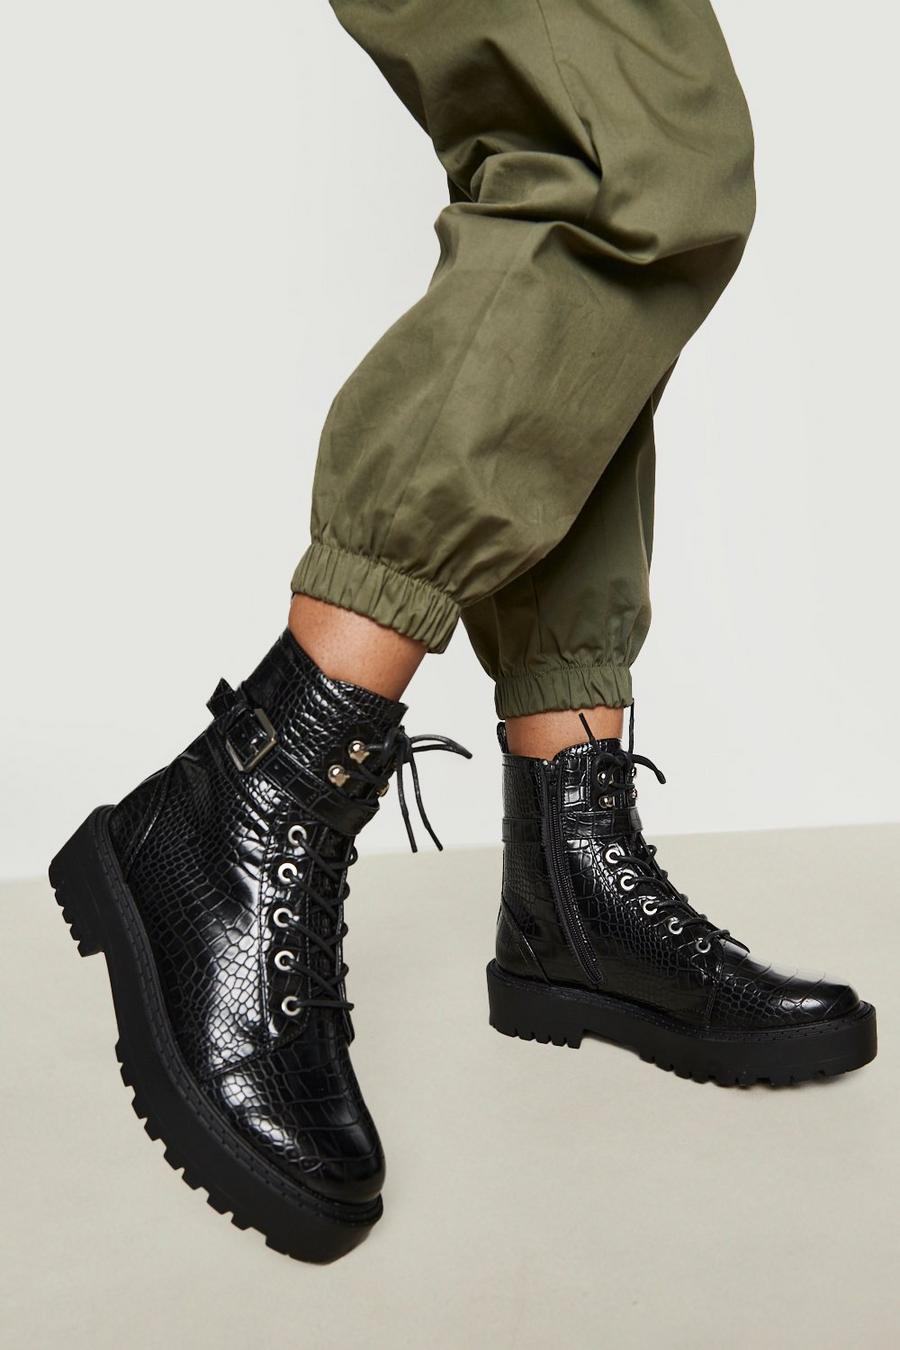 Buckled Croc Lace Up Hiker Boot | Boohoo UK